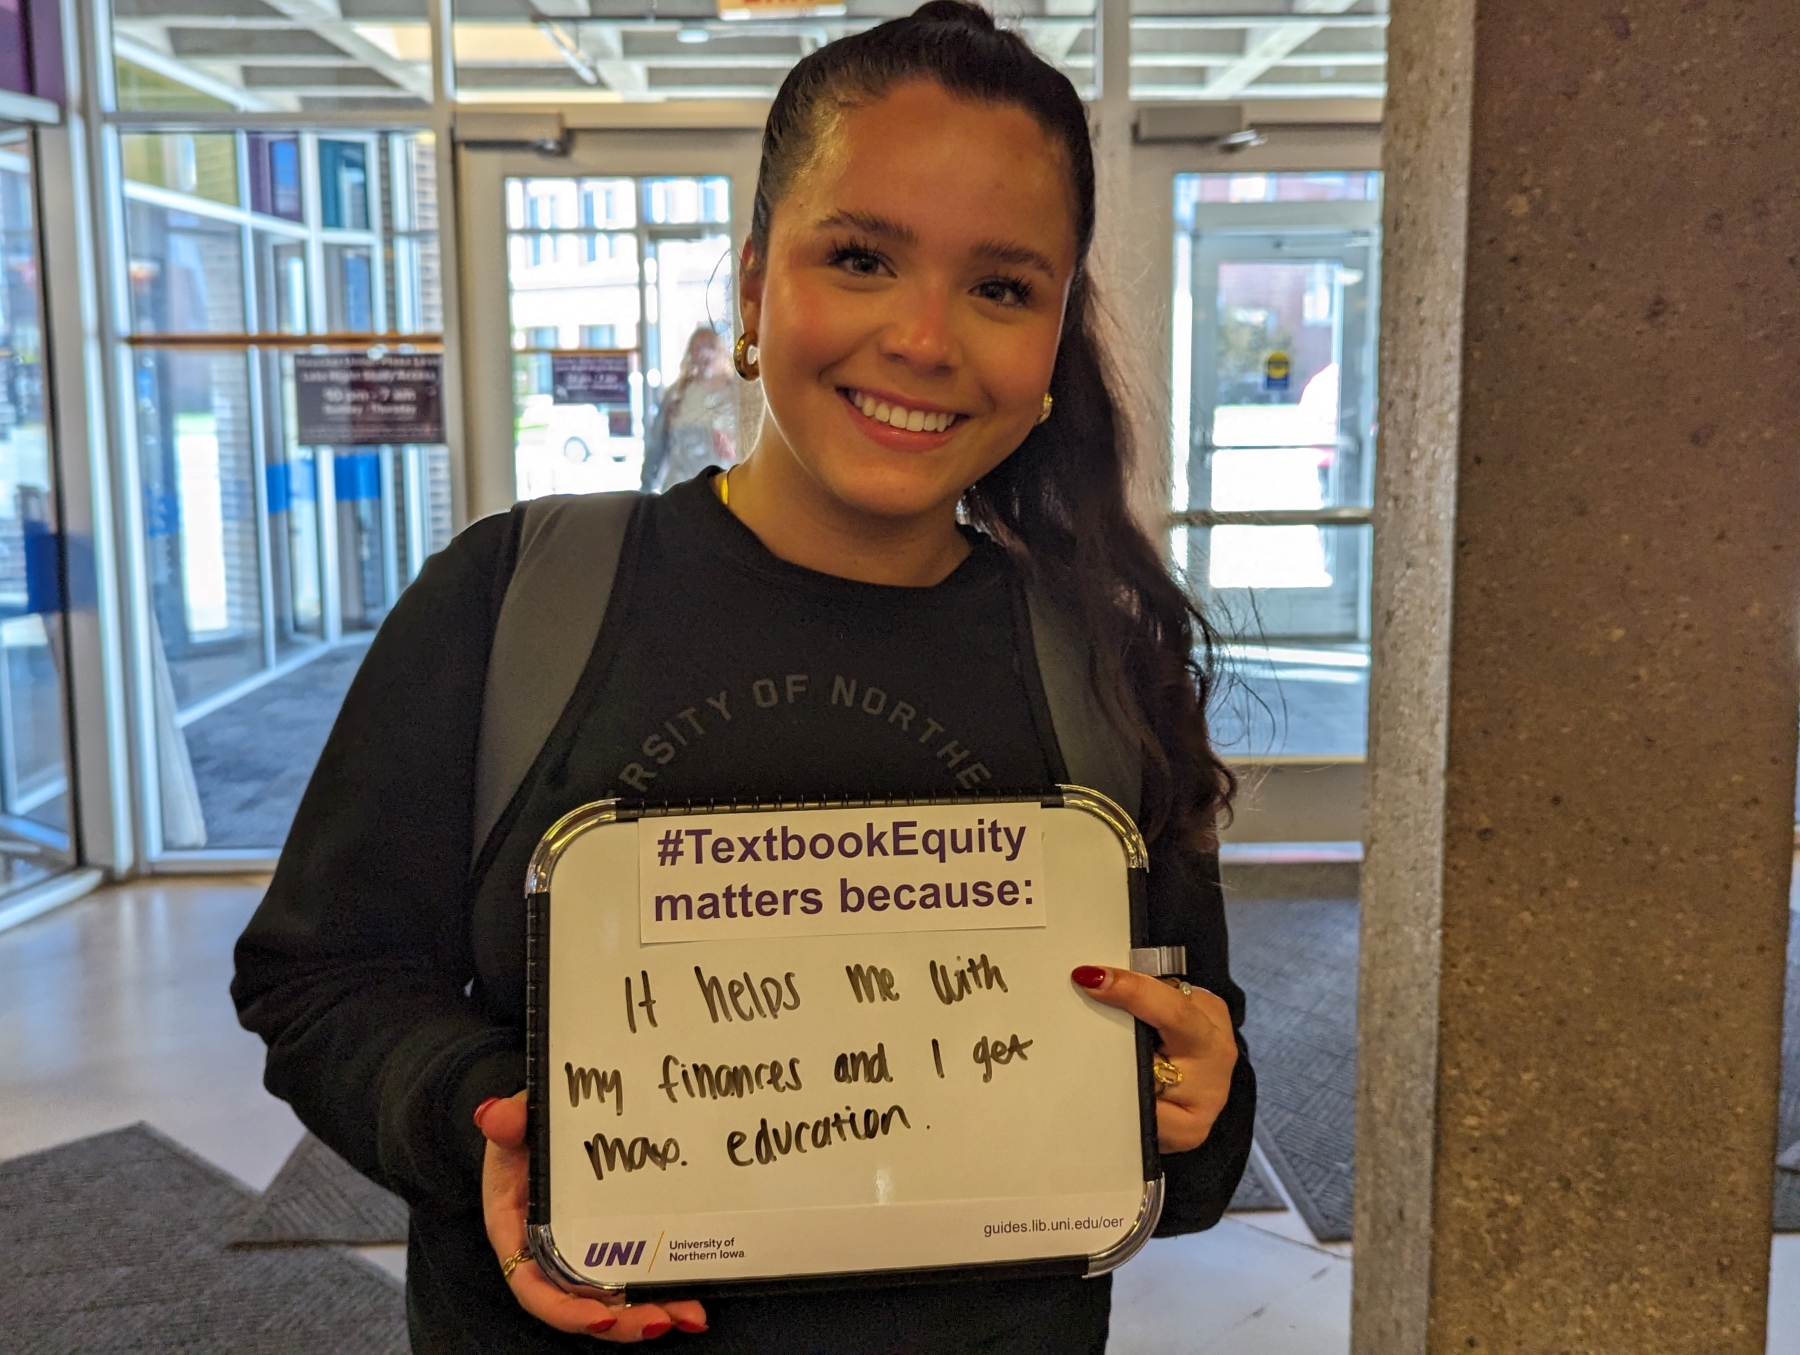 UNI student holding sign that says #TextbookEquity matters because it helps me with my finances and I get more education